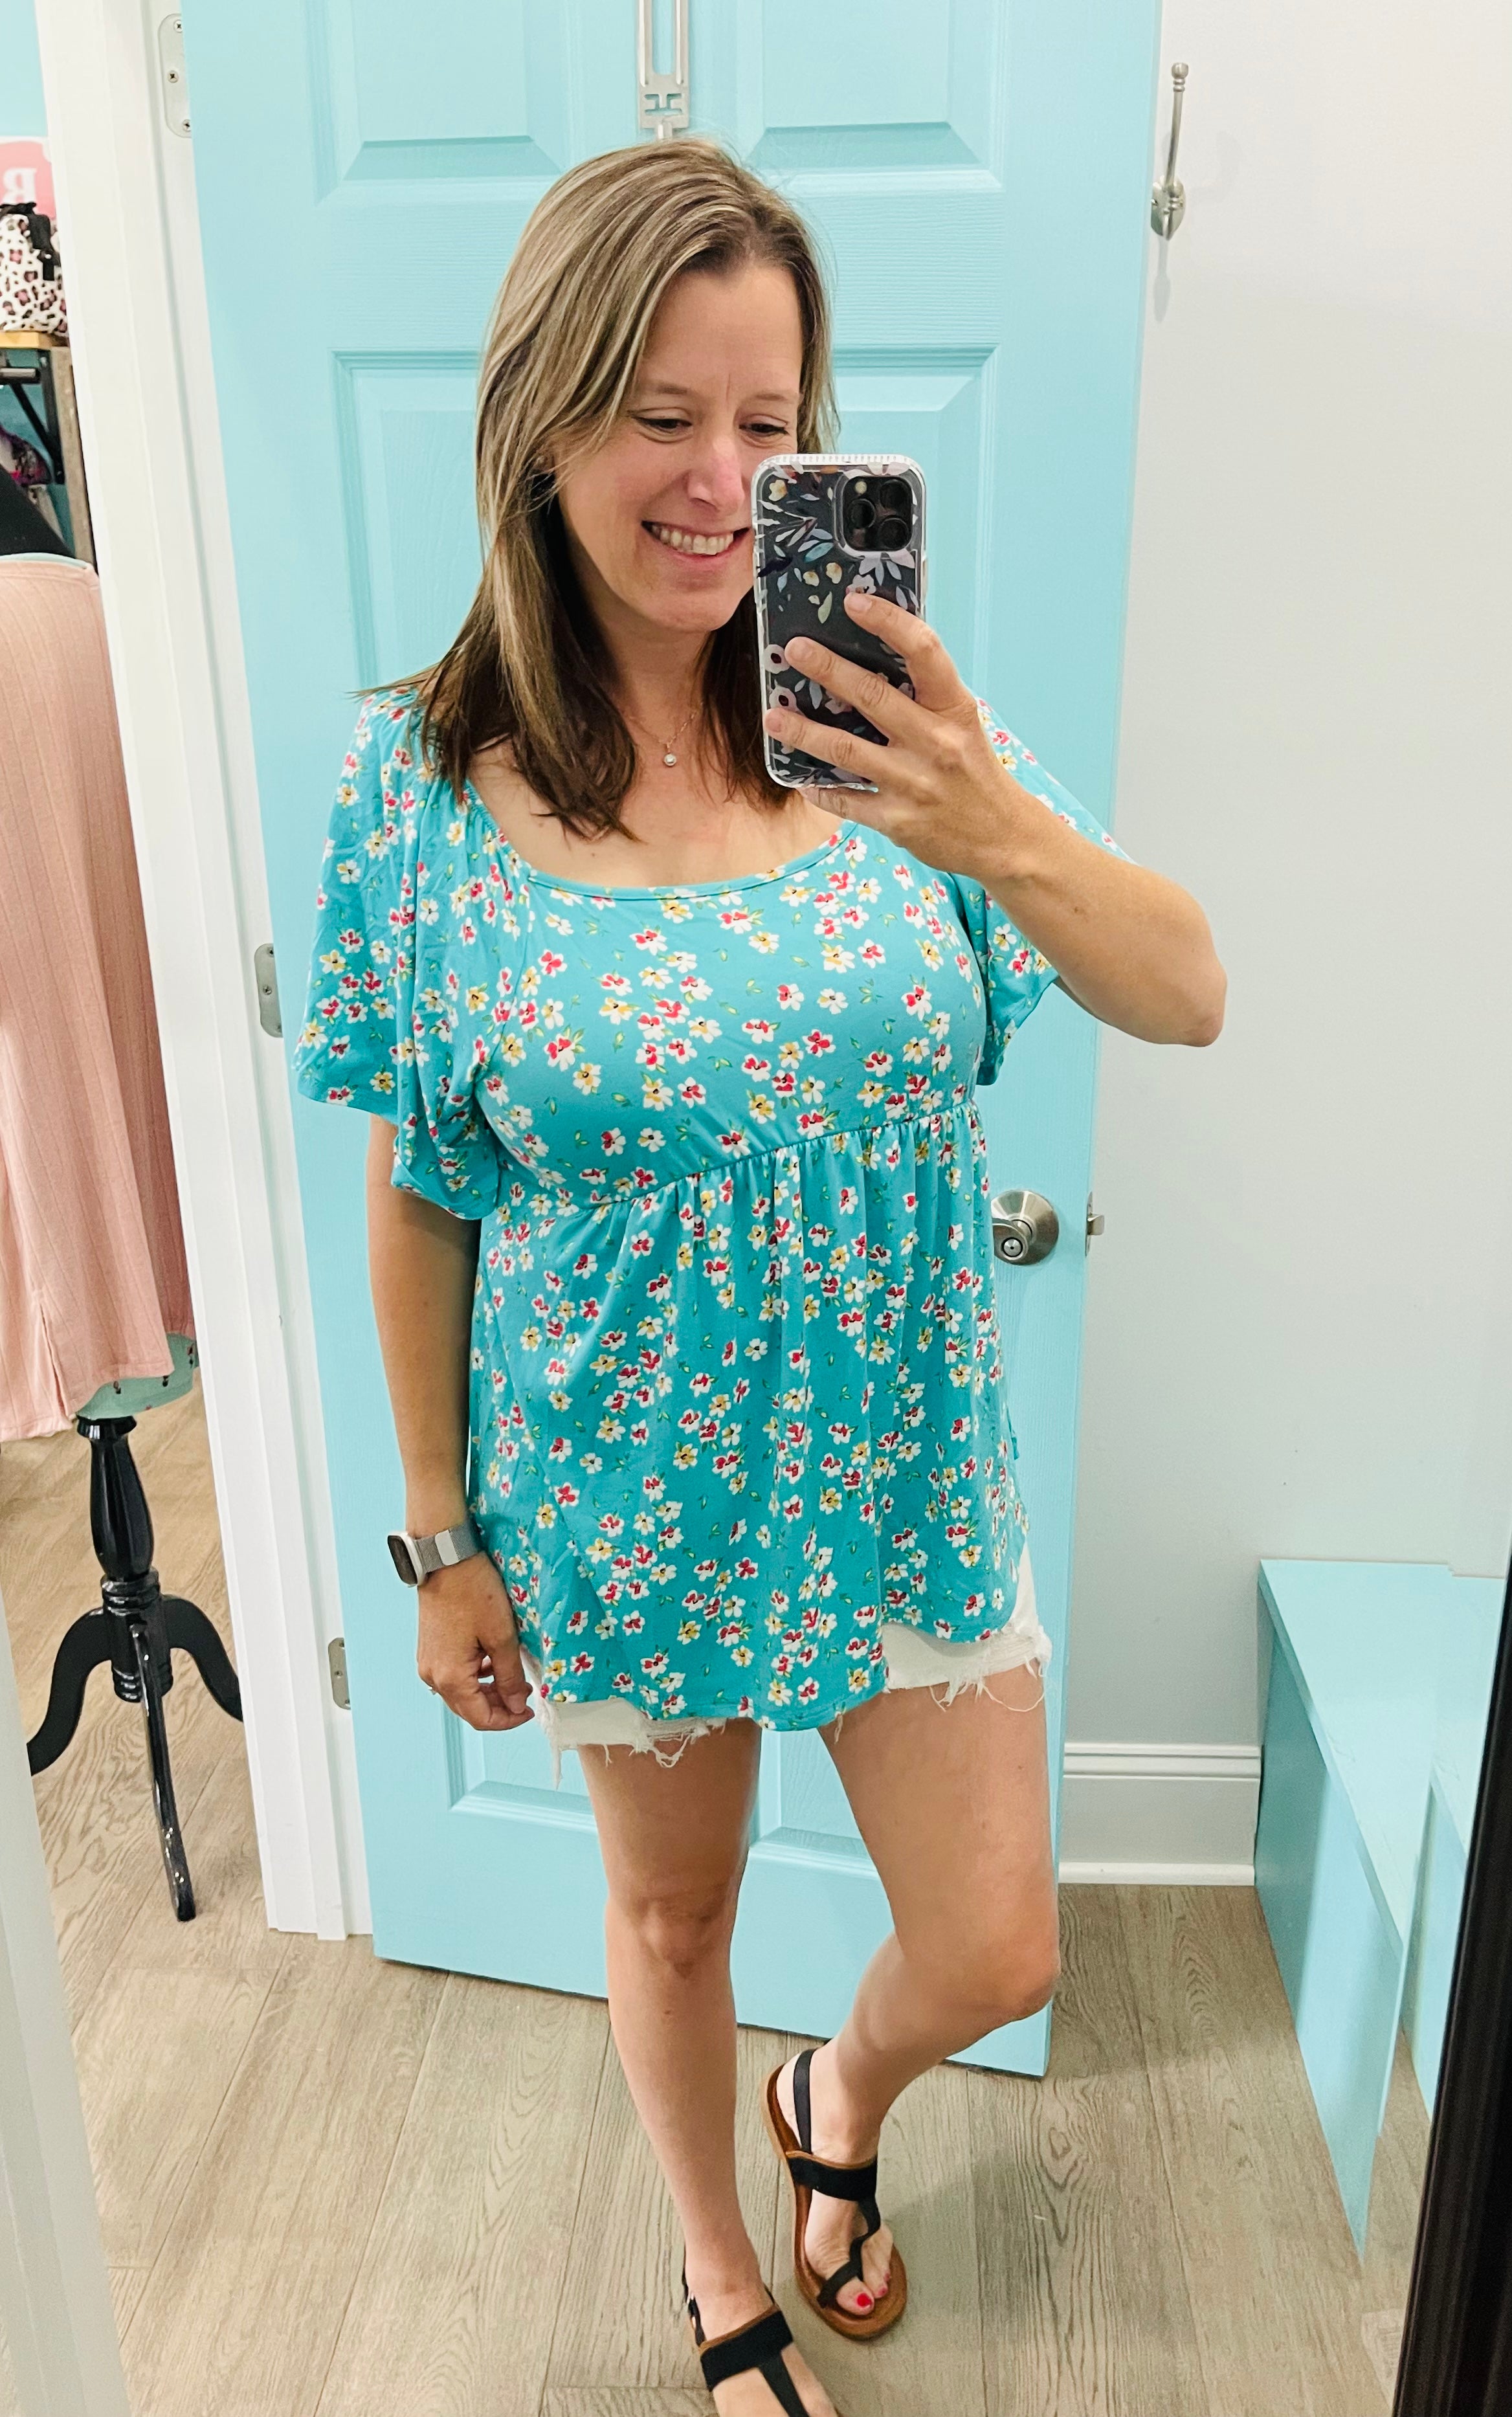 Teal green floral top